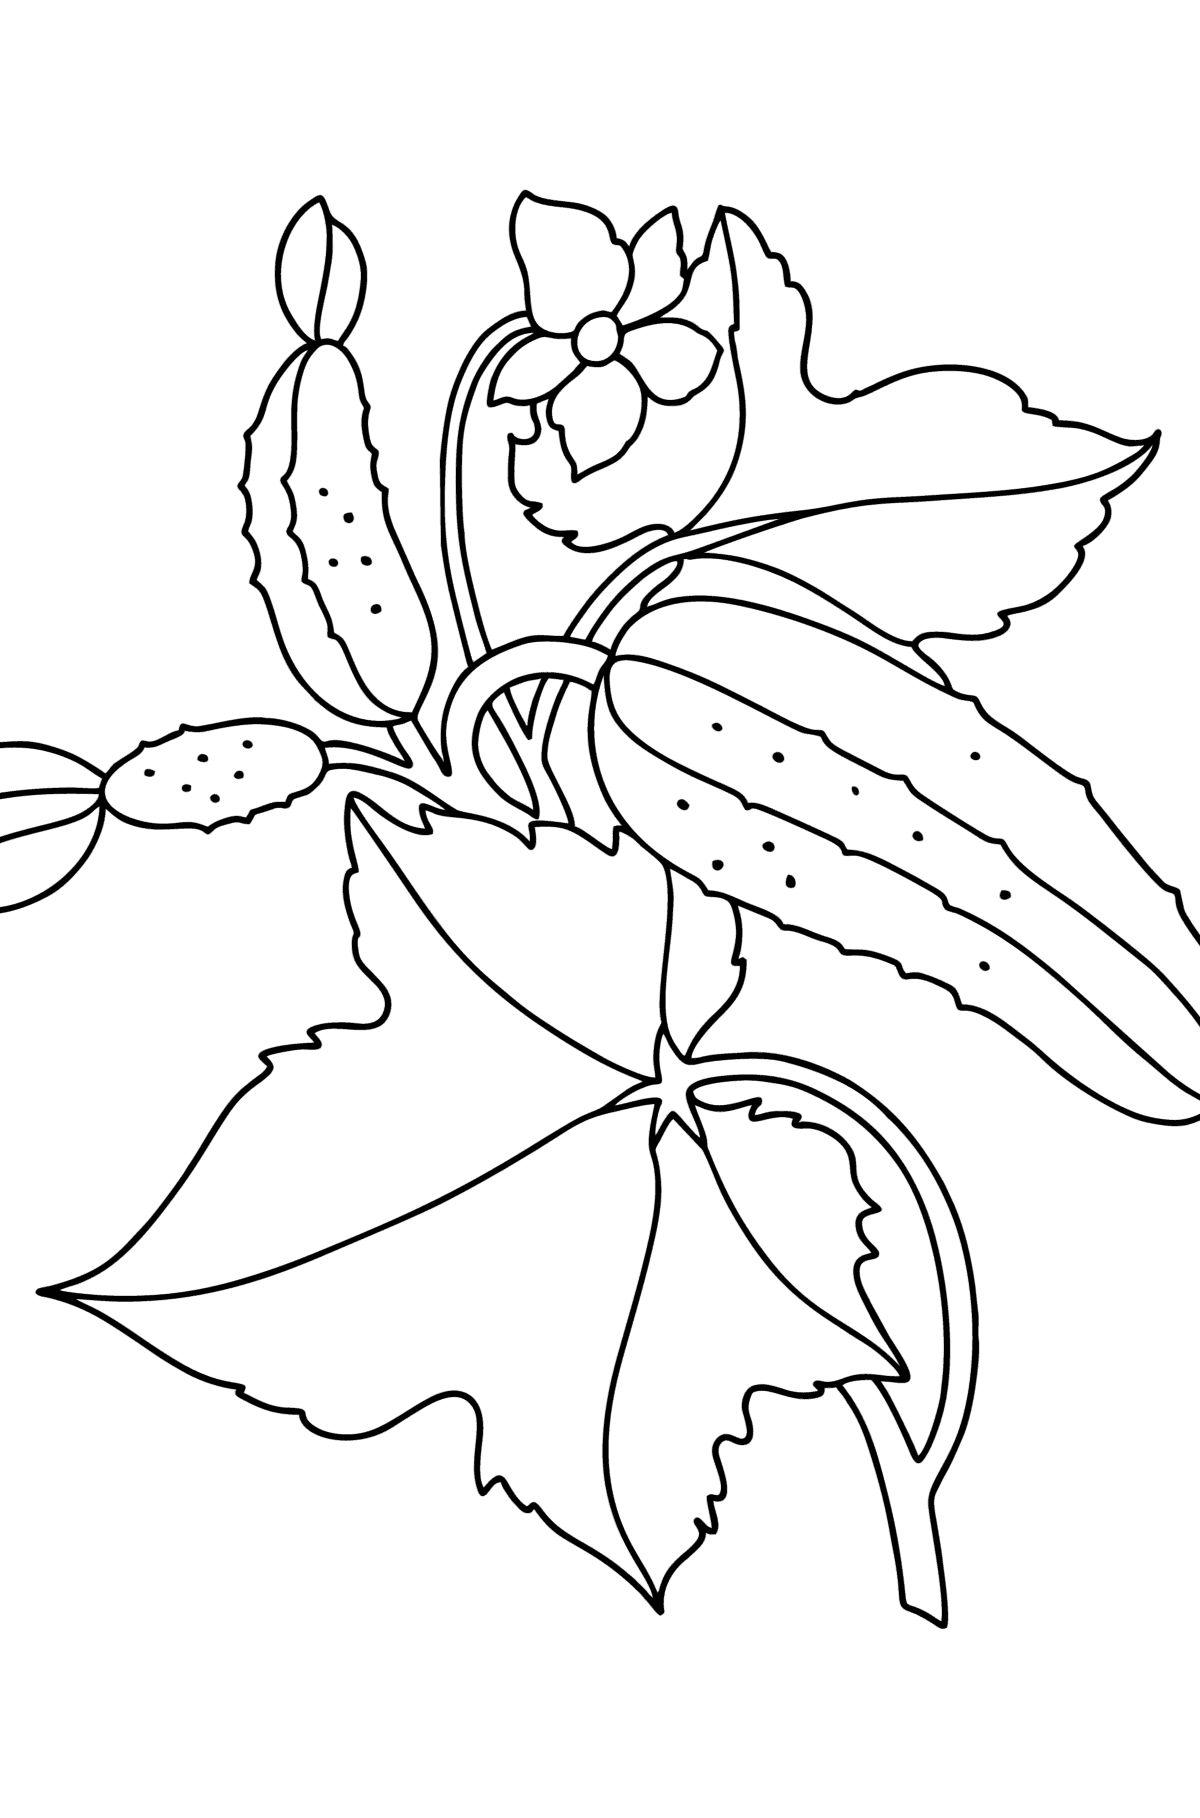 Cucumbers on a branch сoloring page - Coloring Pages for Kids